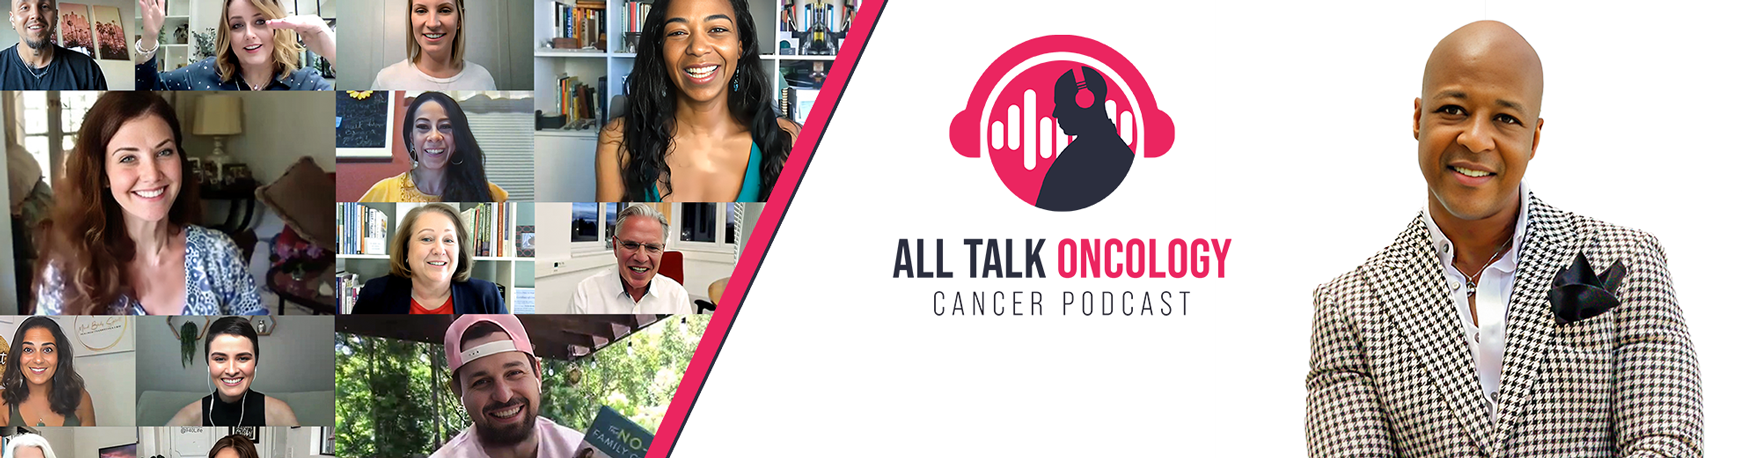 All Talk Oncology Cancer Podcast